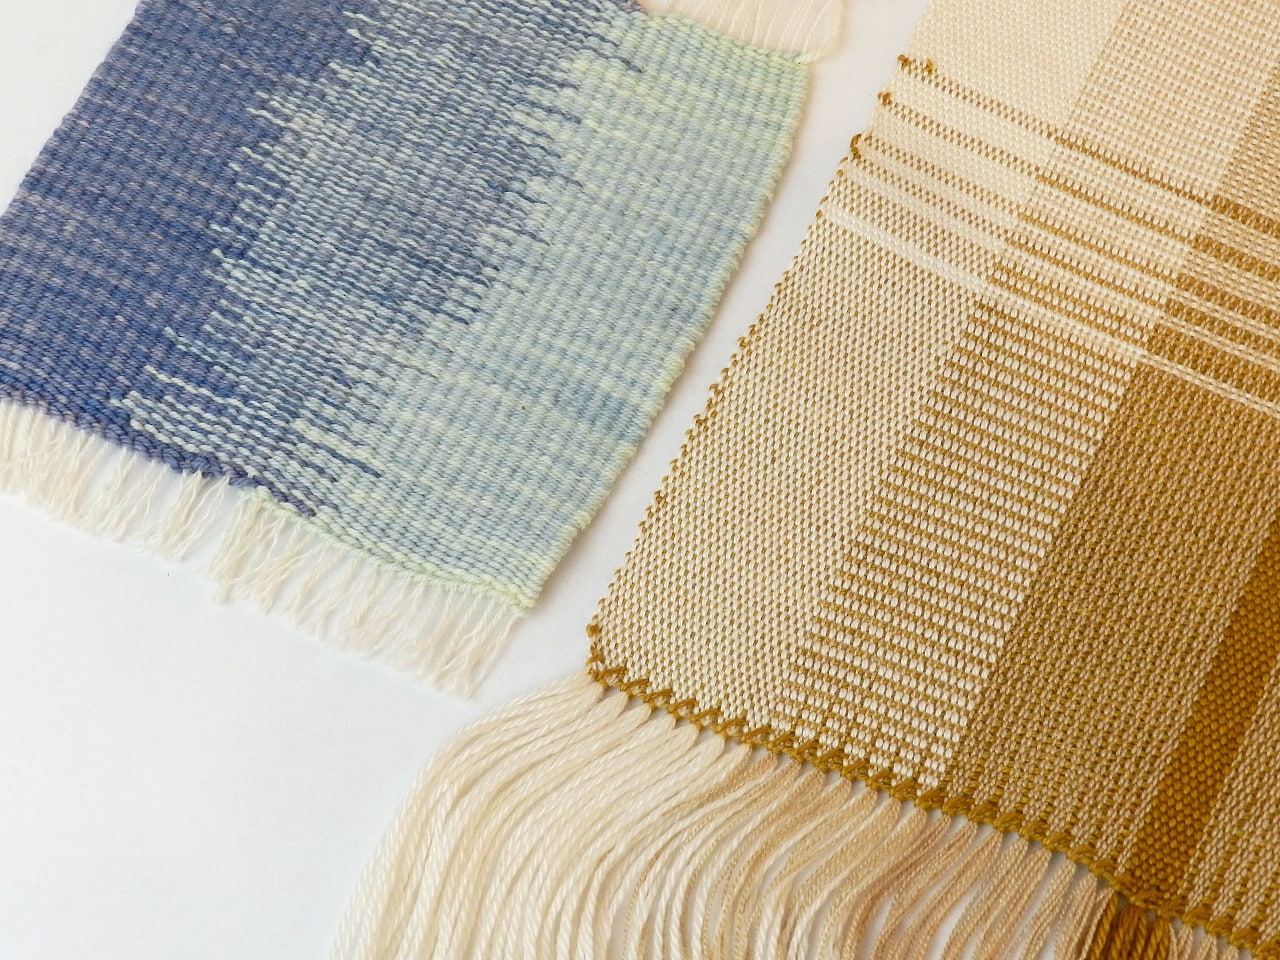 image description: a close of two pieces of handwoven fabric